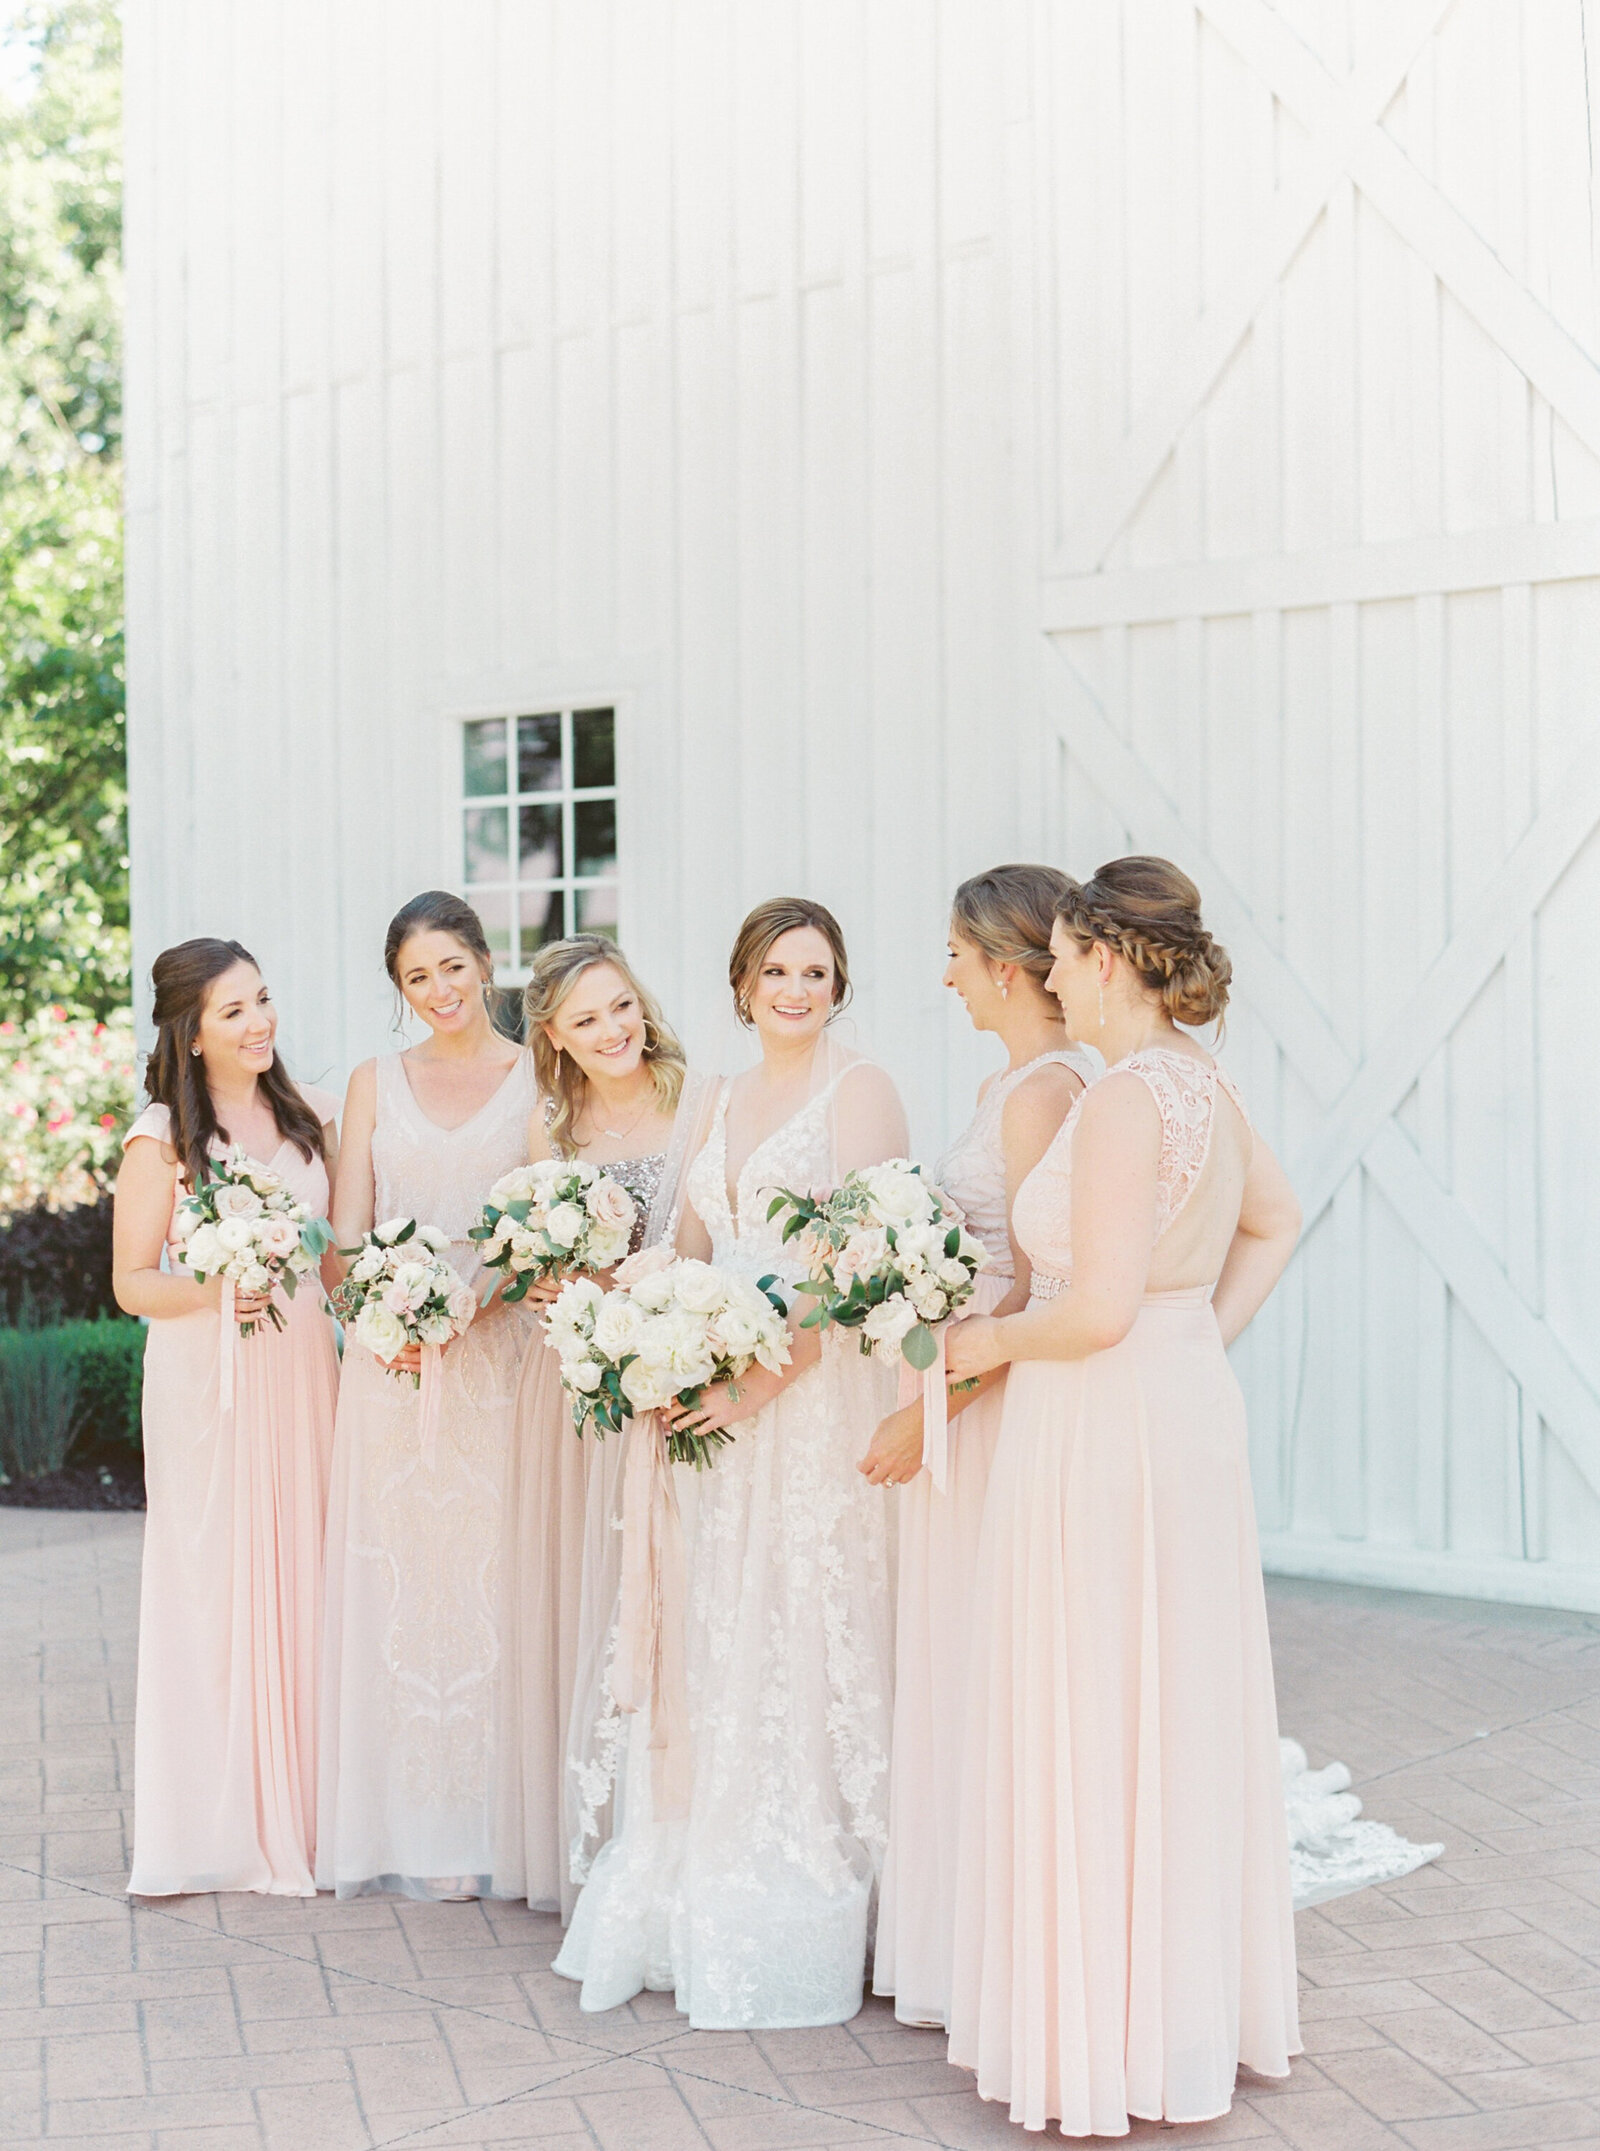 White Sparrow Barn_Lindsay and Scott_Madeline Trent Photography-0059